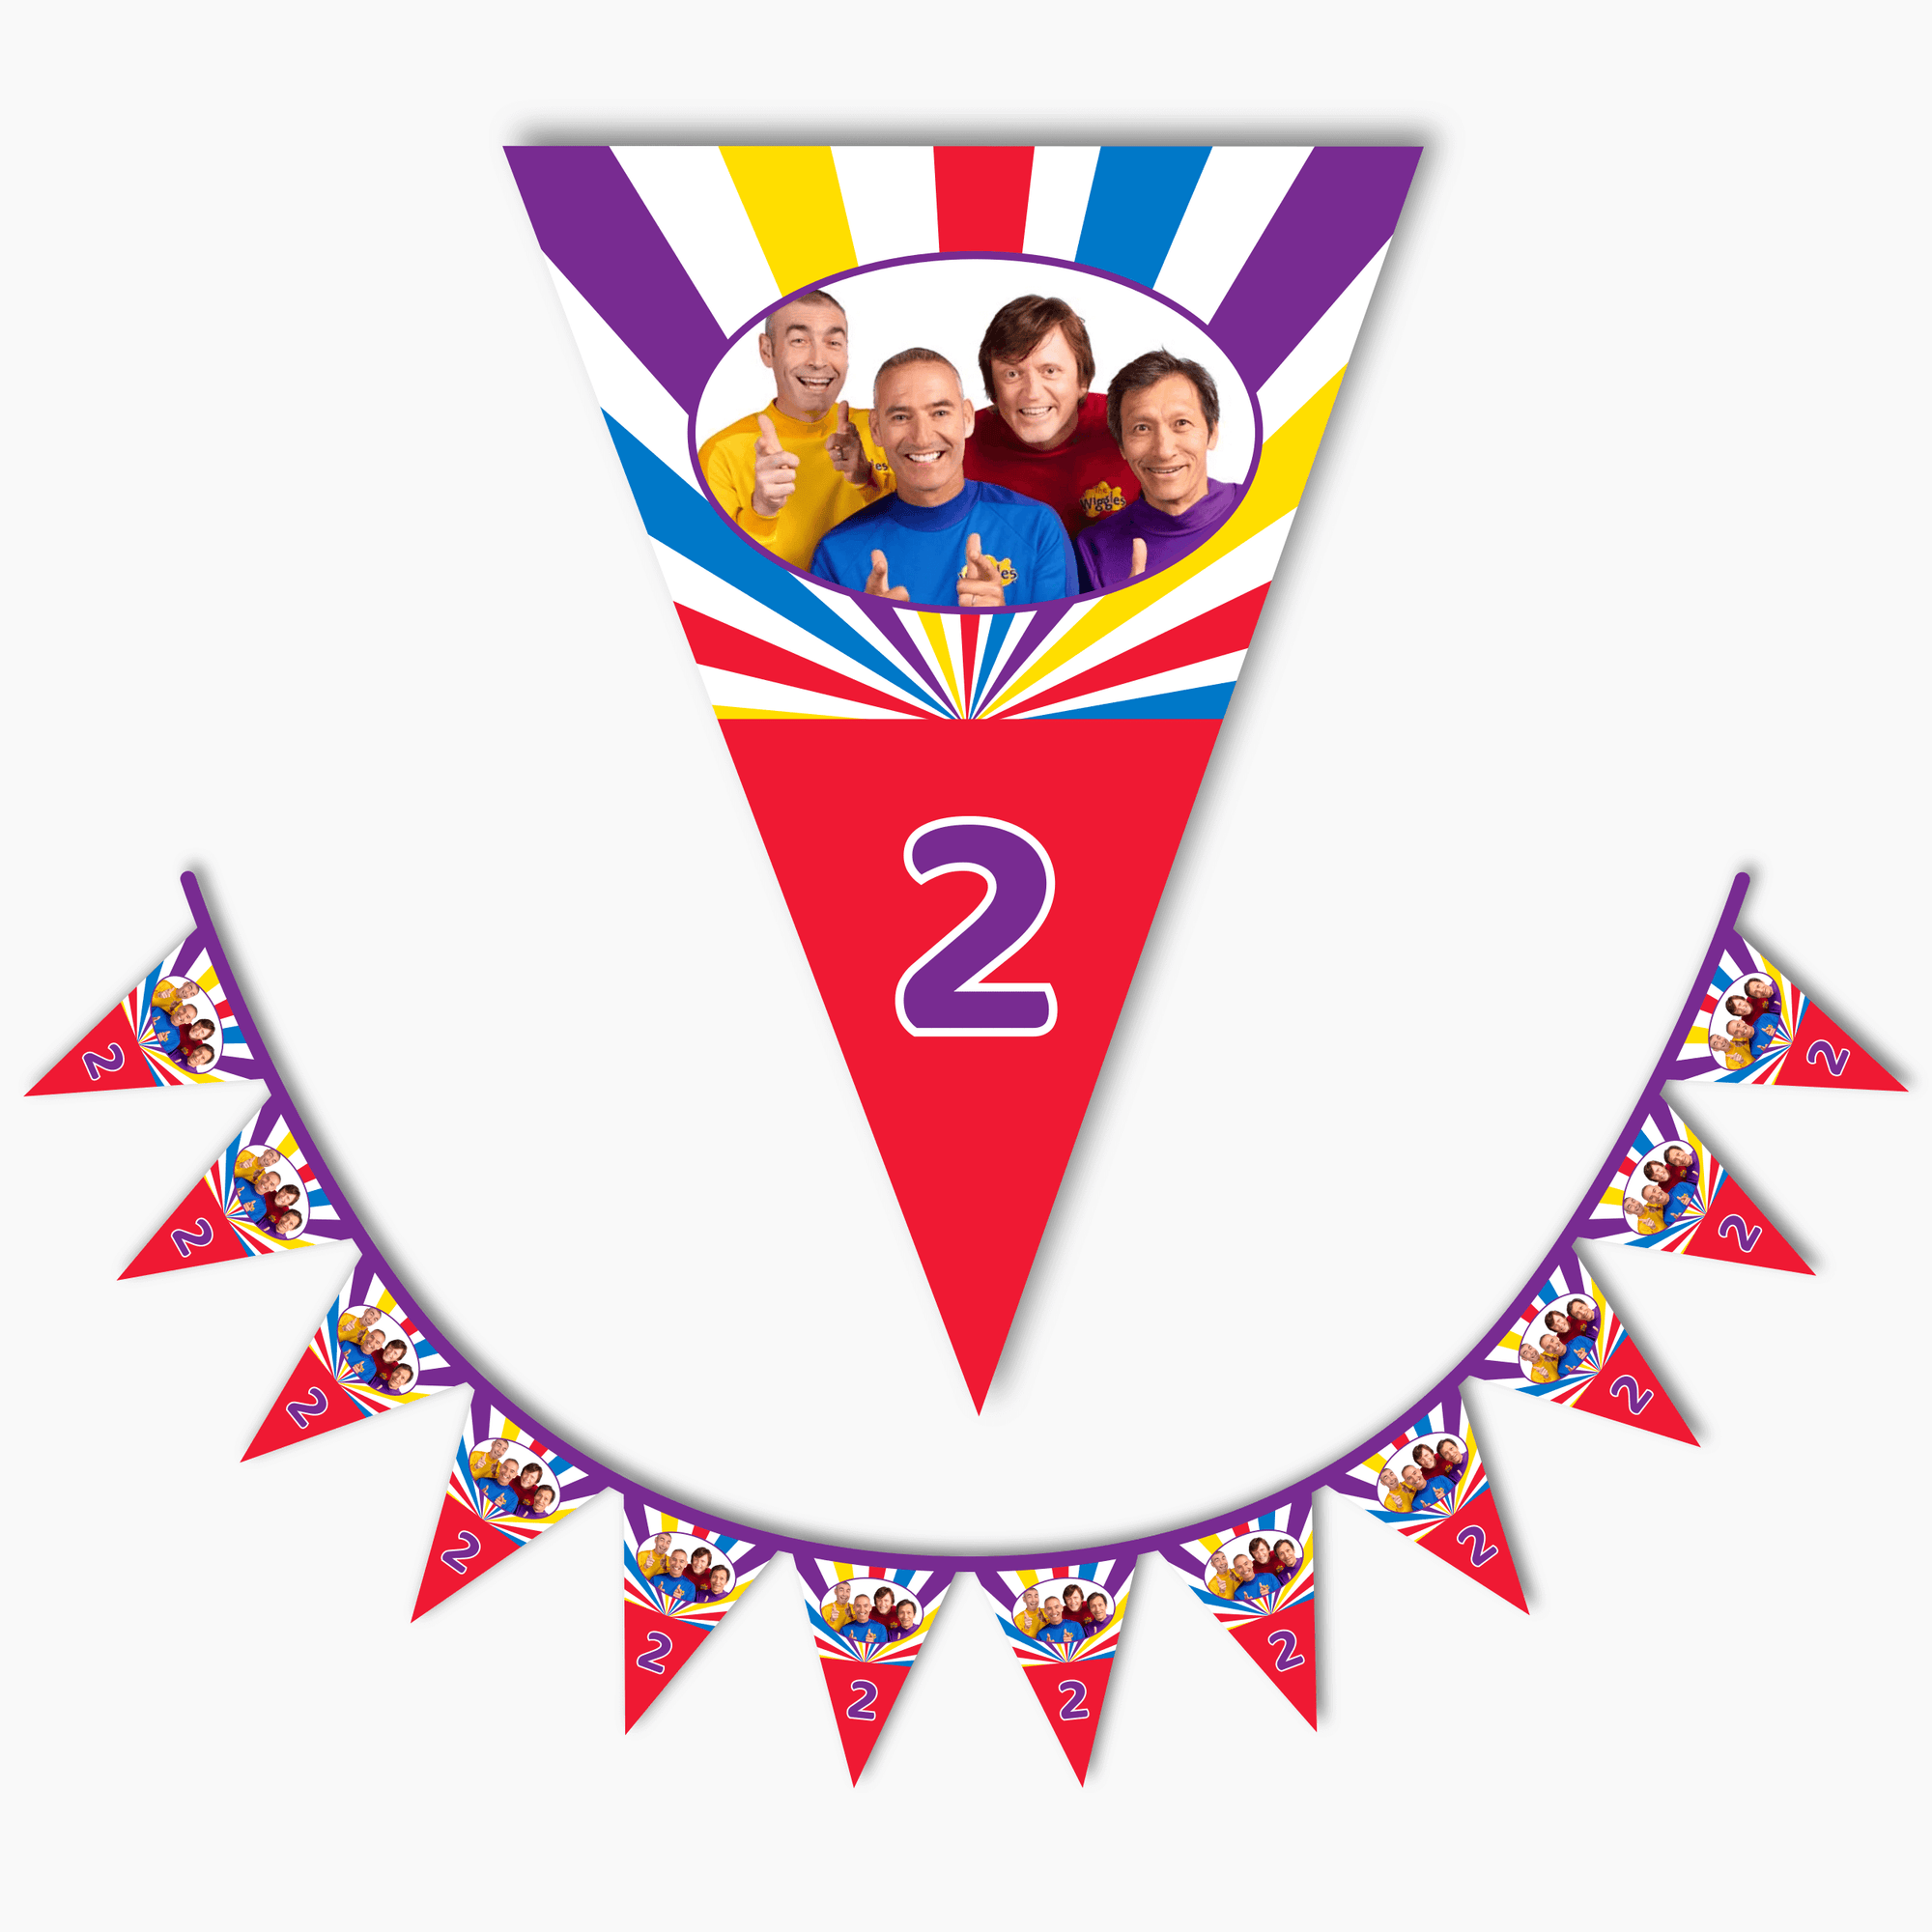 Personalised The Wiggles Birthday Party Flag Bunting - Cartoon